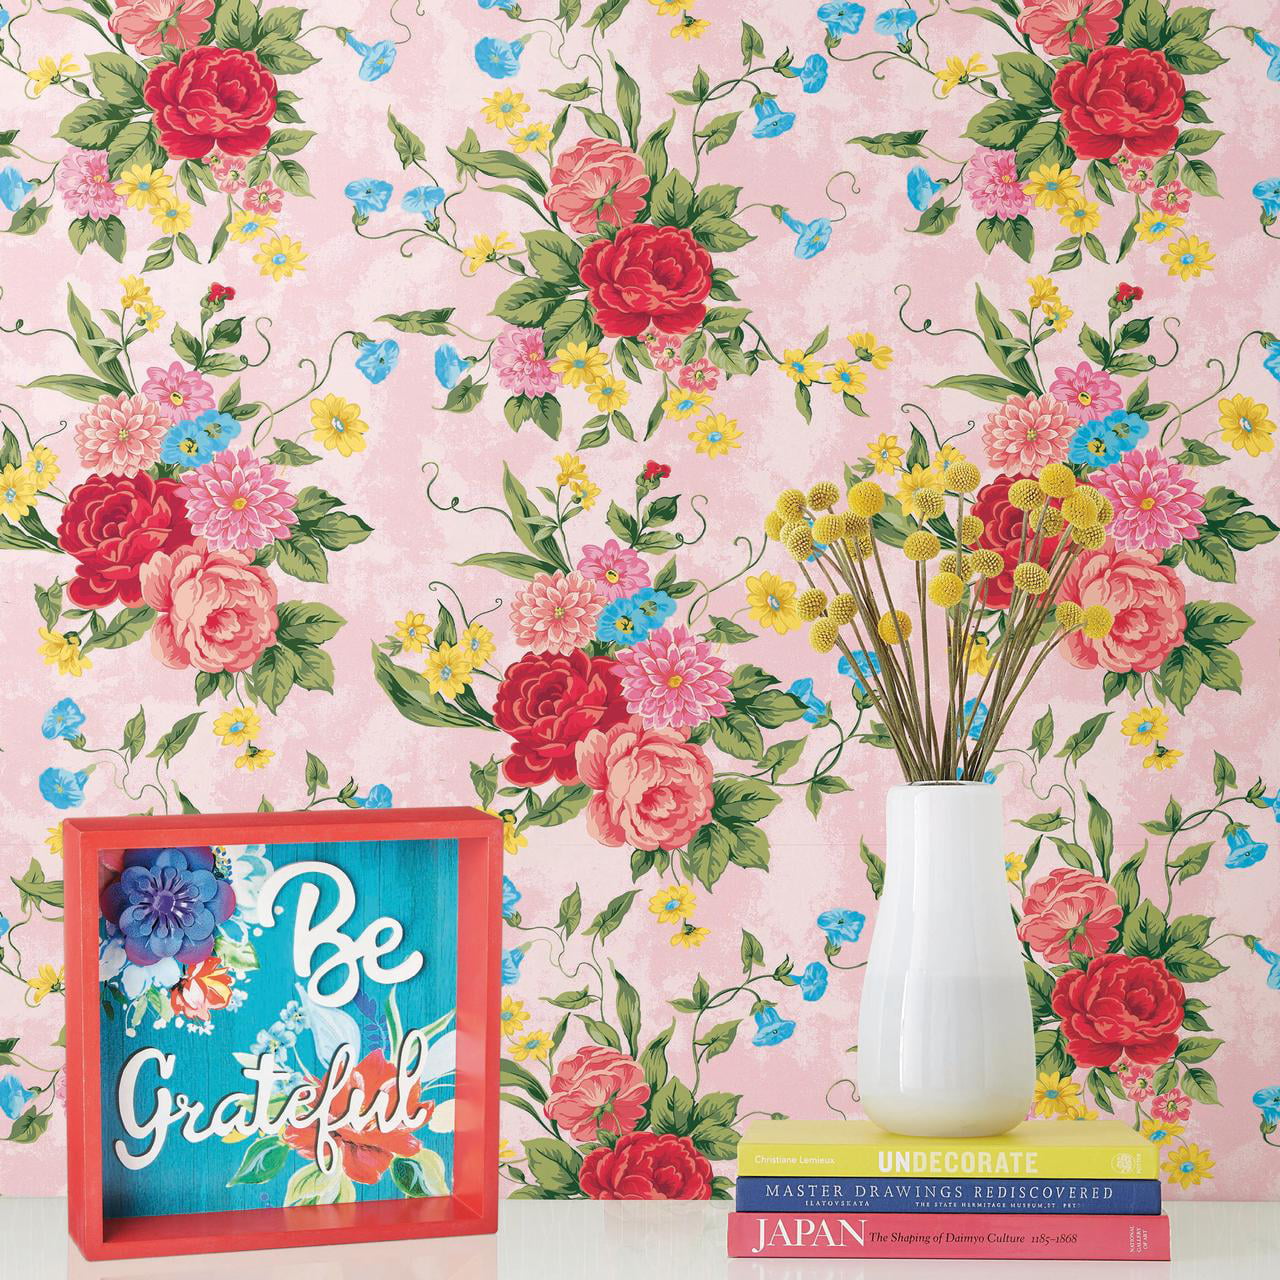 The Pioneer Woman Wallpaper at Walmart  How to Buy Ree Drummonds New  Wallpaper